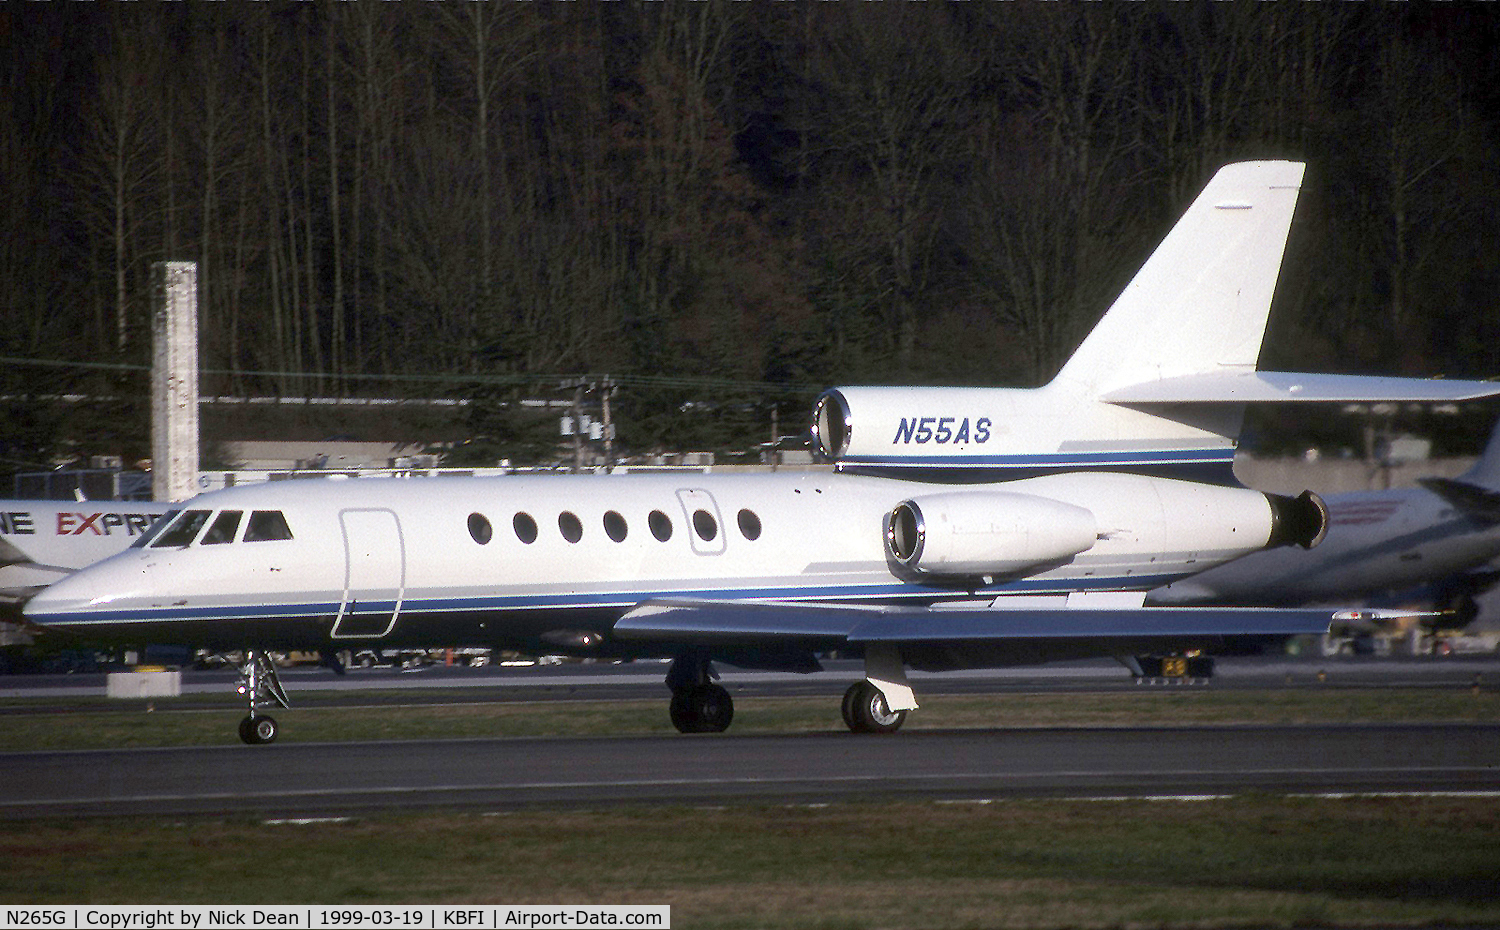 N265G, 1990 Dassault Falcon 50 C/N 214, Seen here as N55AS owned by Albertsons grocery stores this frame is currently registered N265G as posted